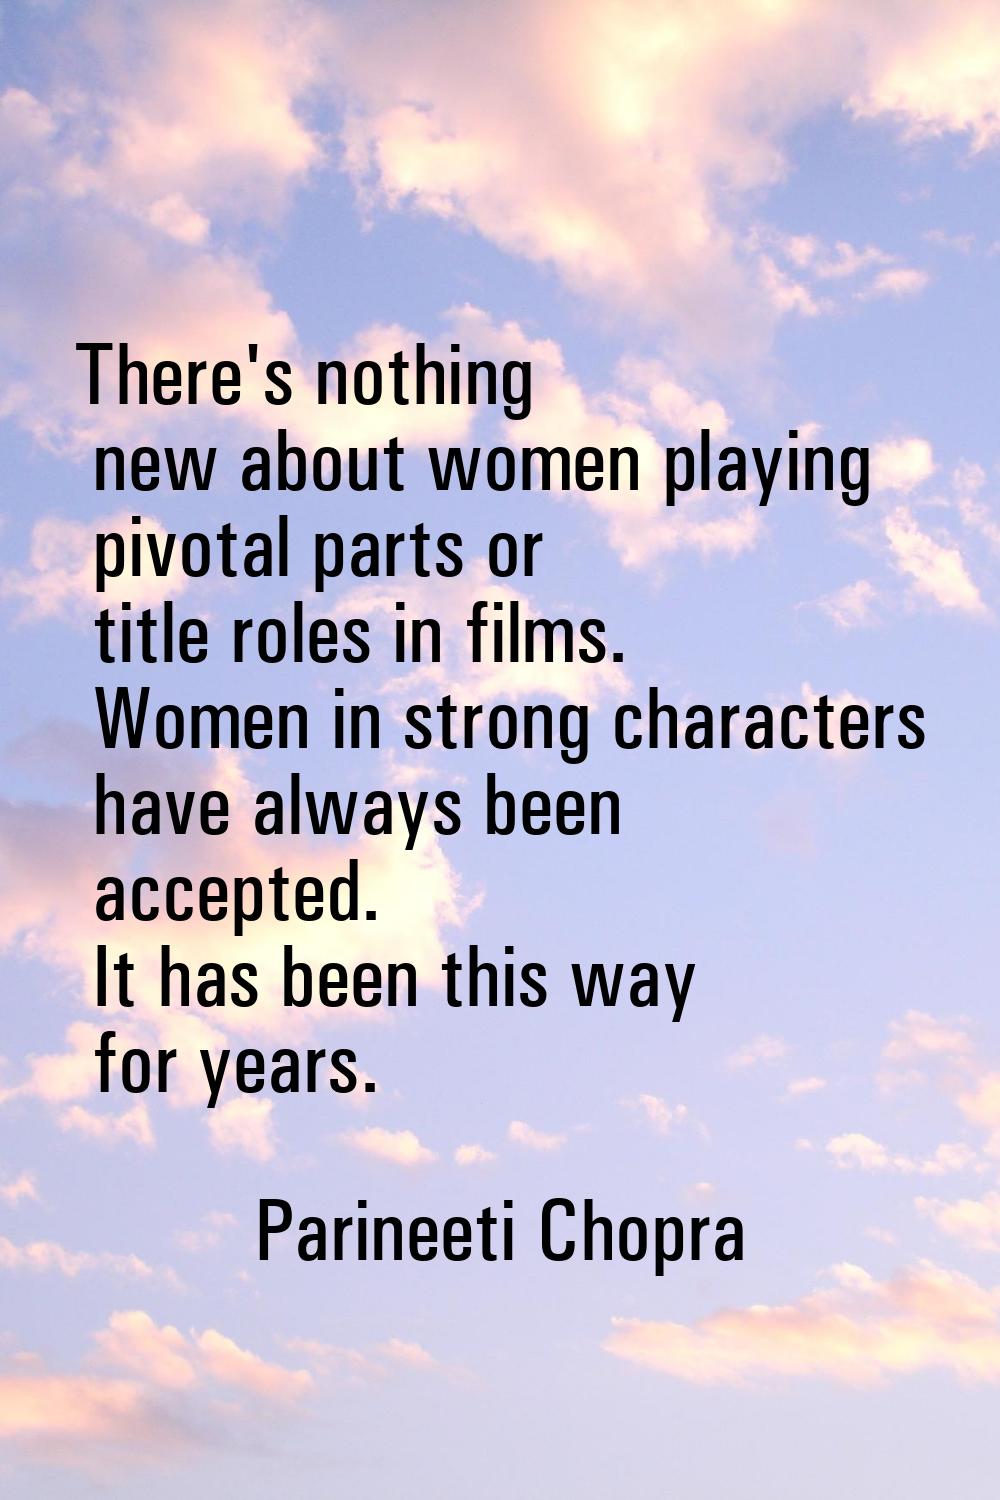 There's nothing new about women playing pivotal parts or title roles in films. Women in strong char